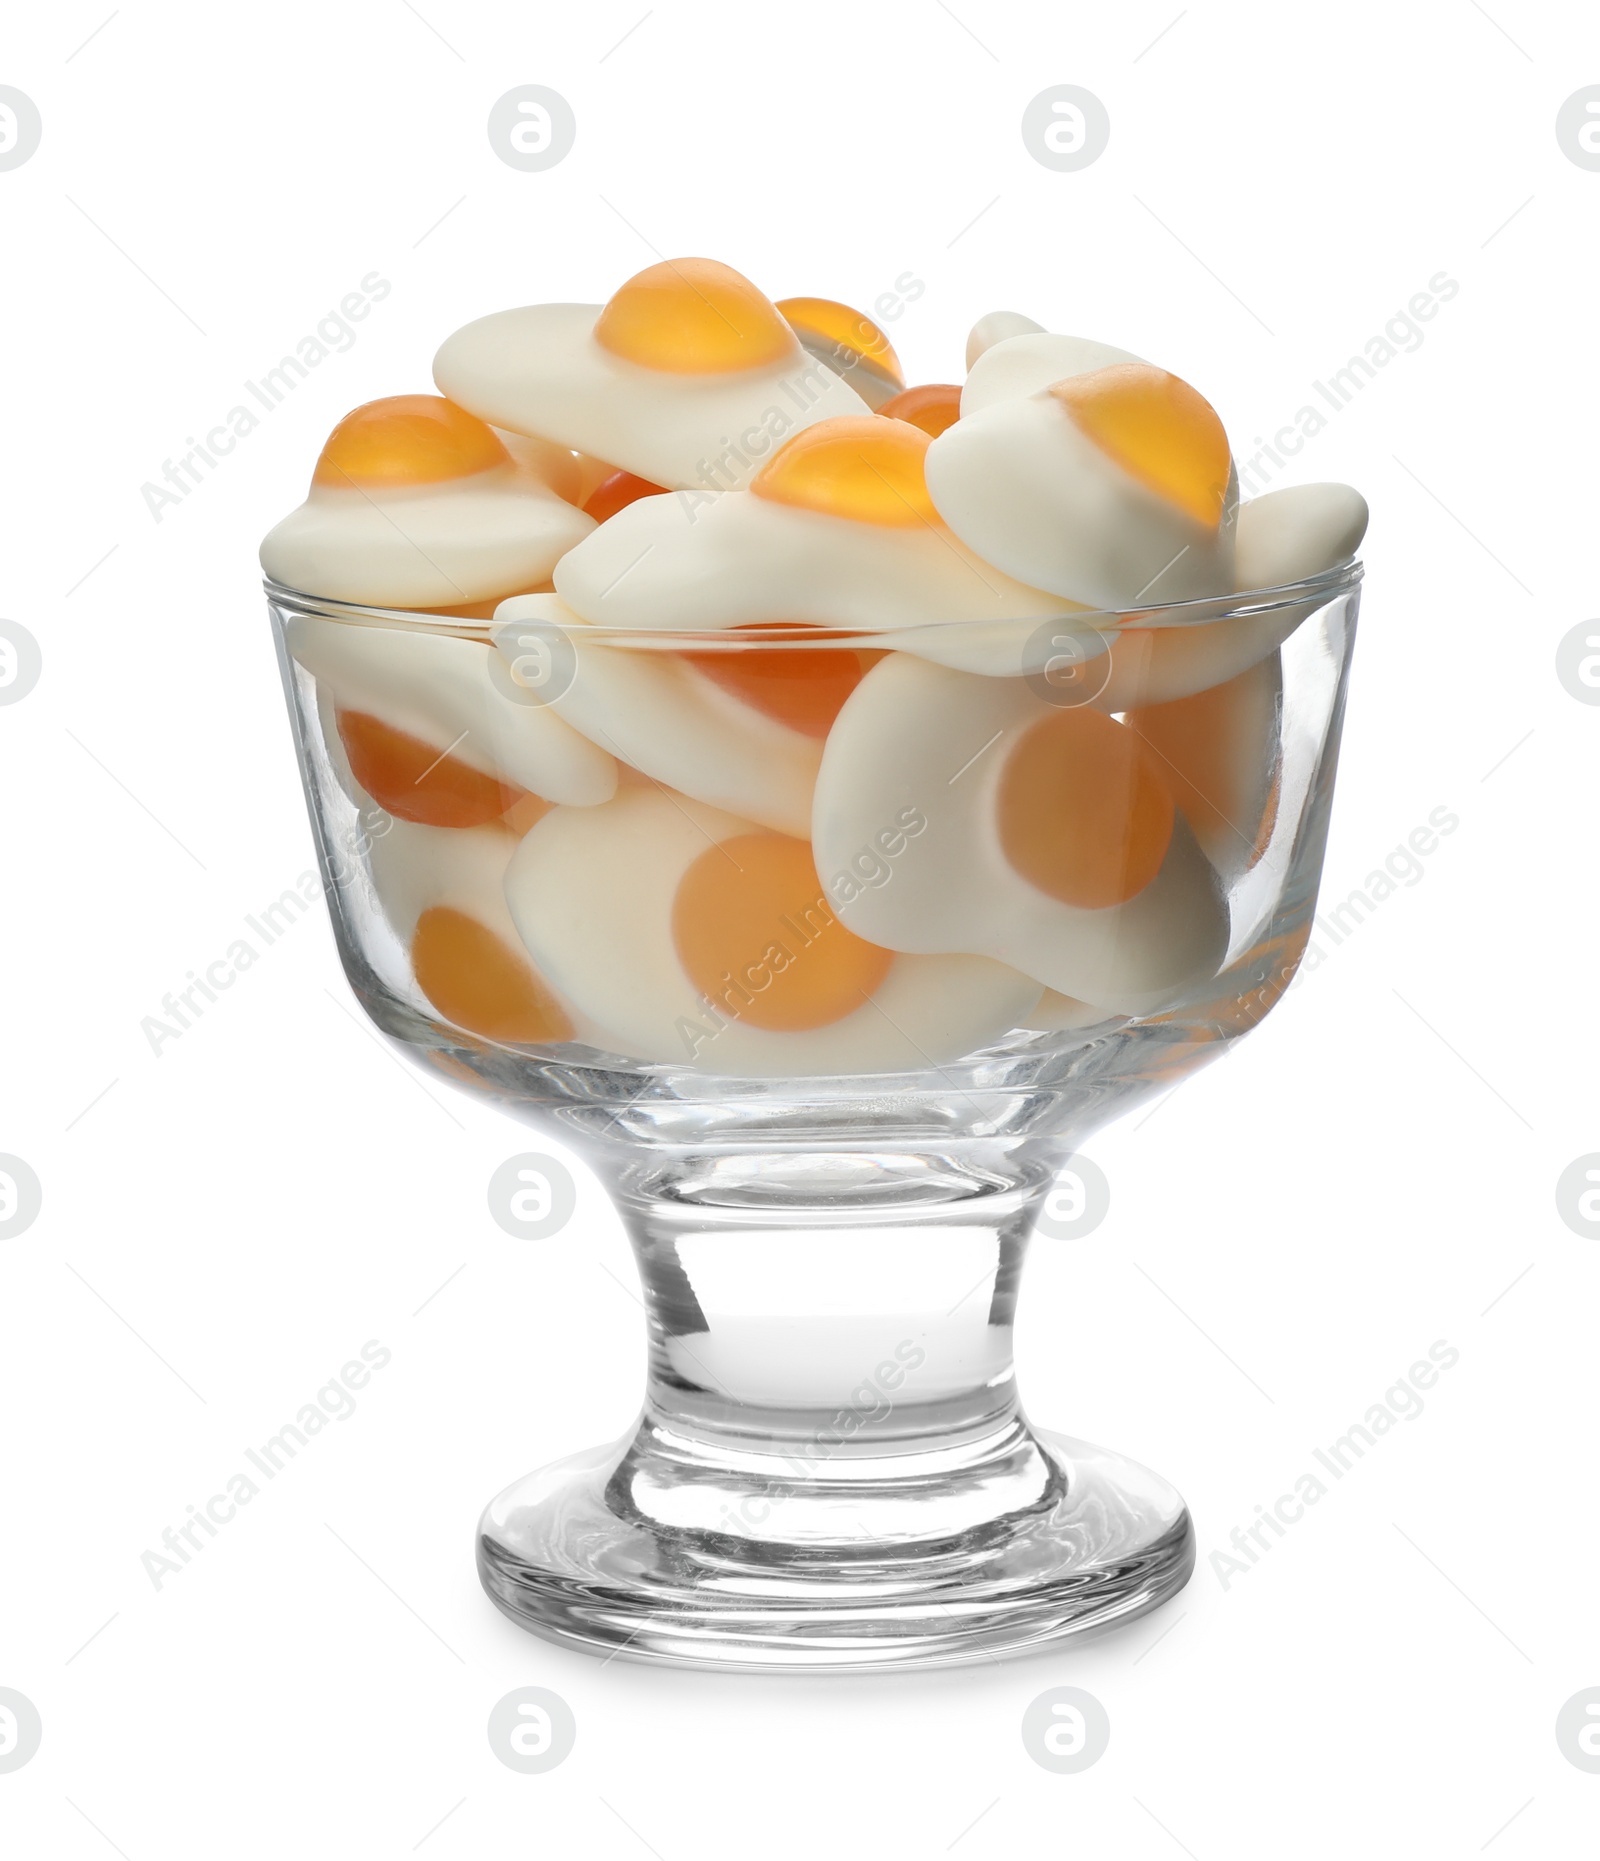 Photo of Glass with tasty jelly candies in shape of egg on white background